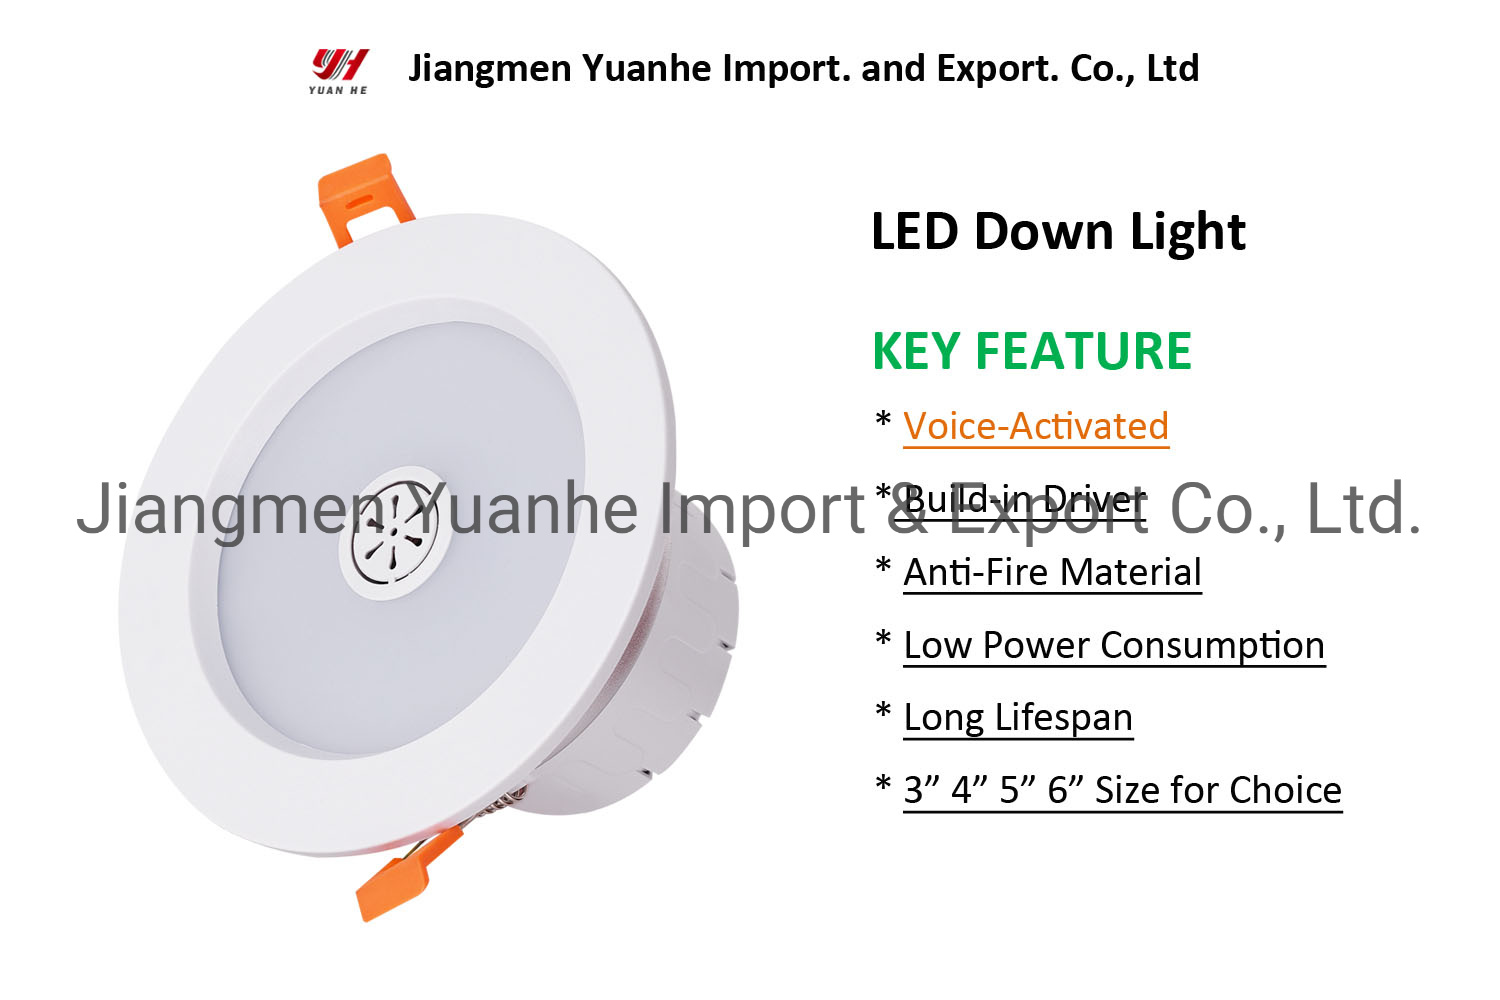 Voice-Activated LED Downlight